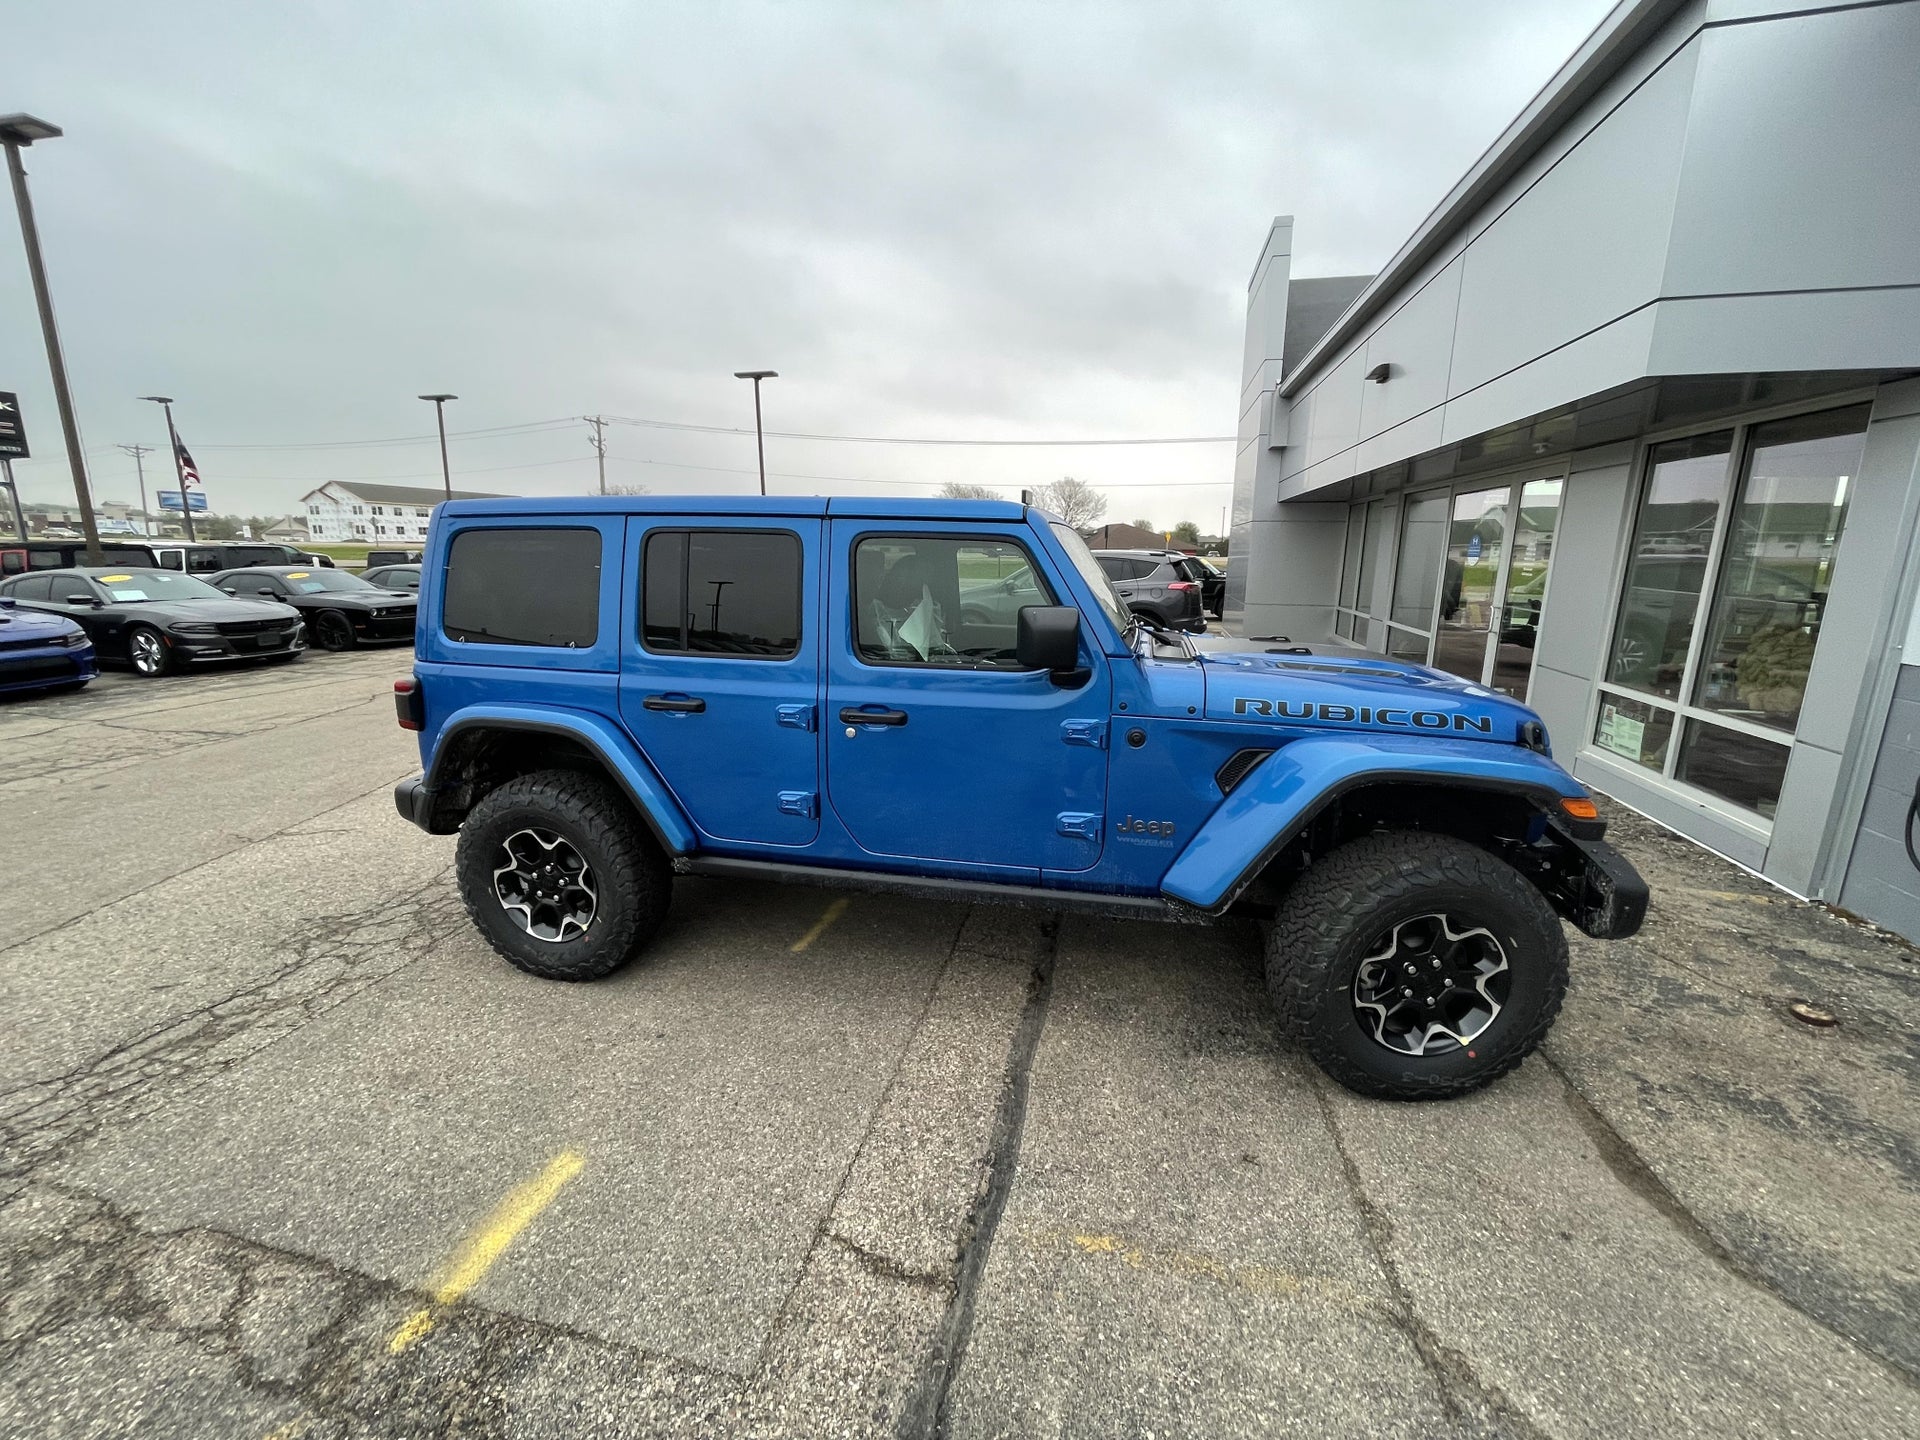 Hydro Blue Jeep Wrangler 4xe Owners Picture Thread Jeep Wrangler 4xe Forum